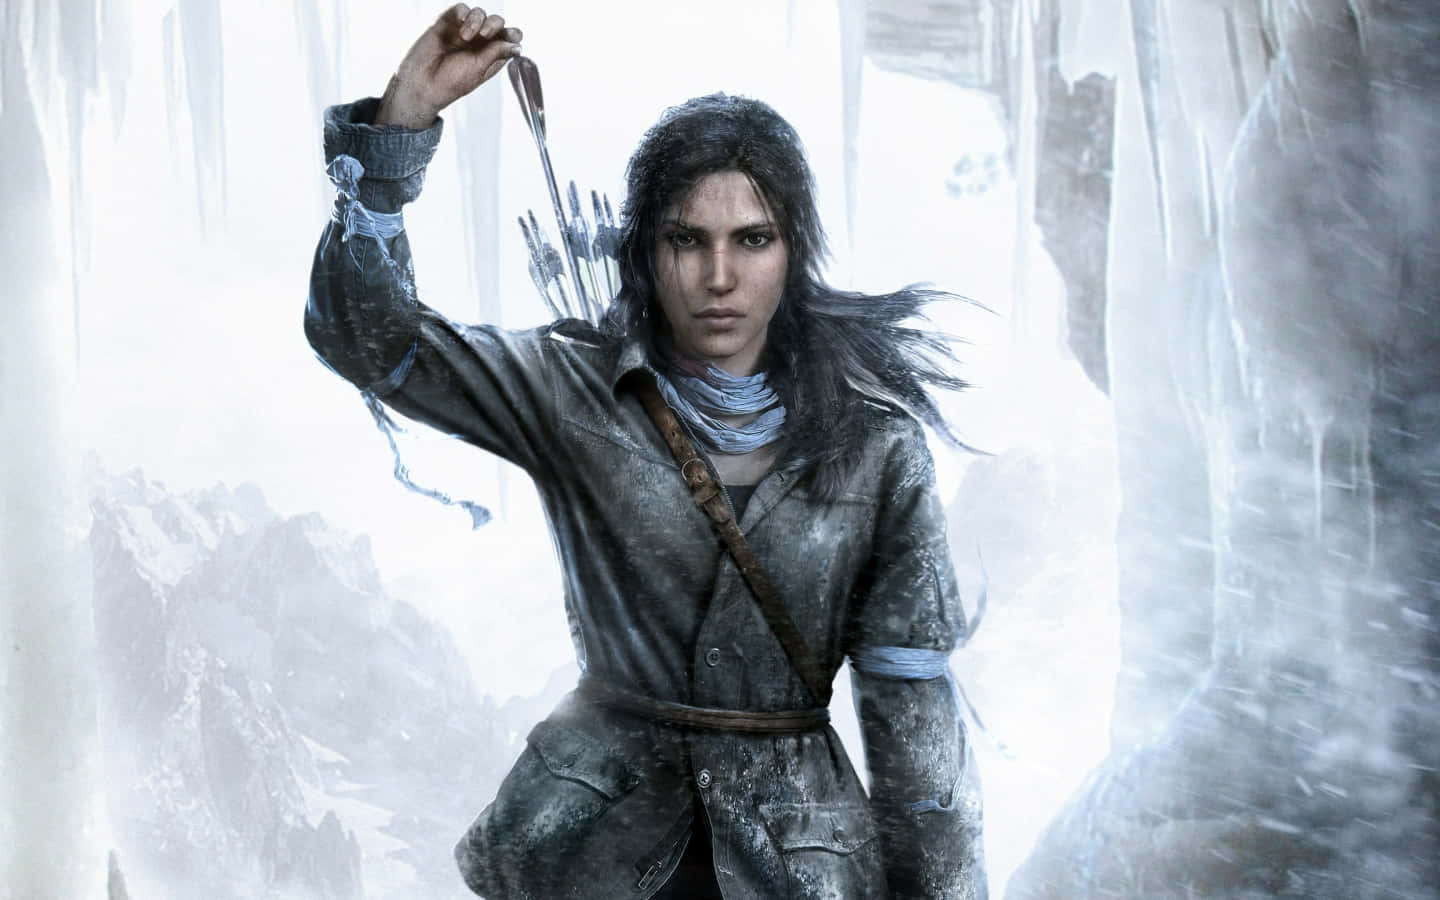 The Tomb Raider Is Standing In An Icy Cave